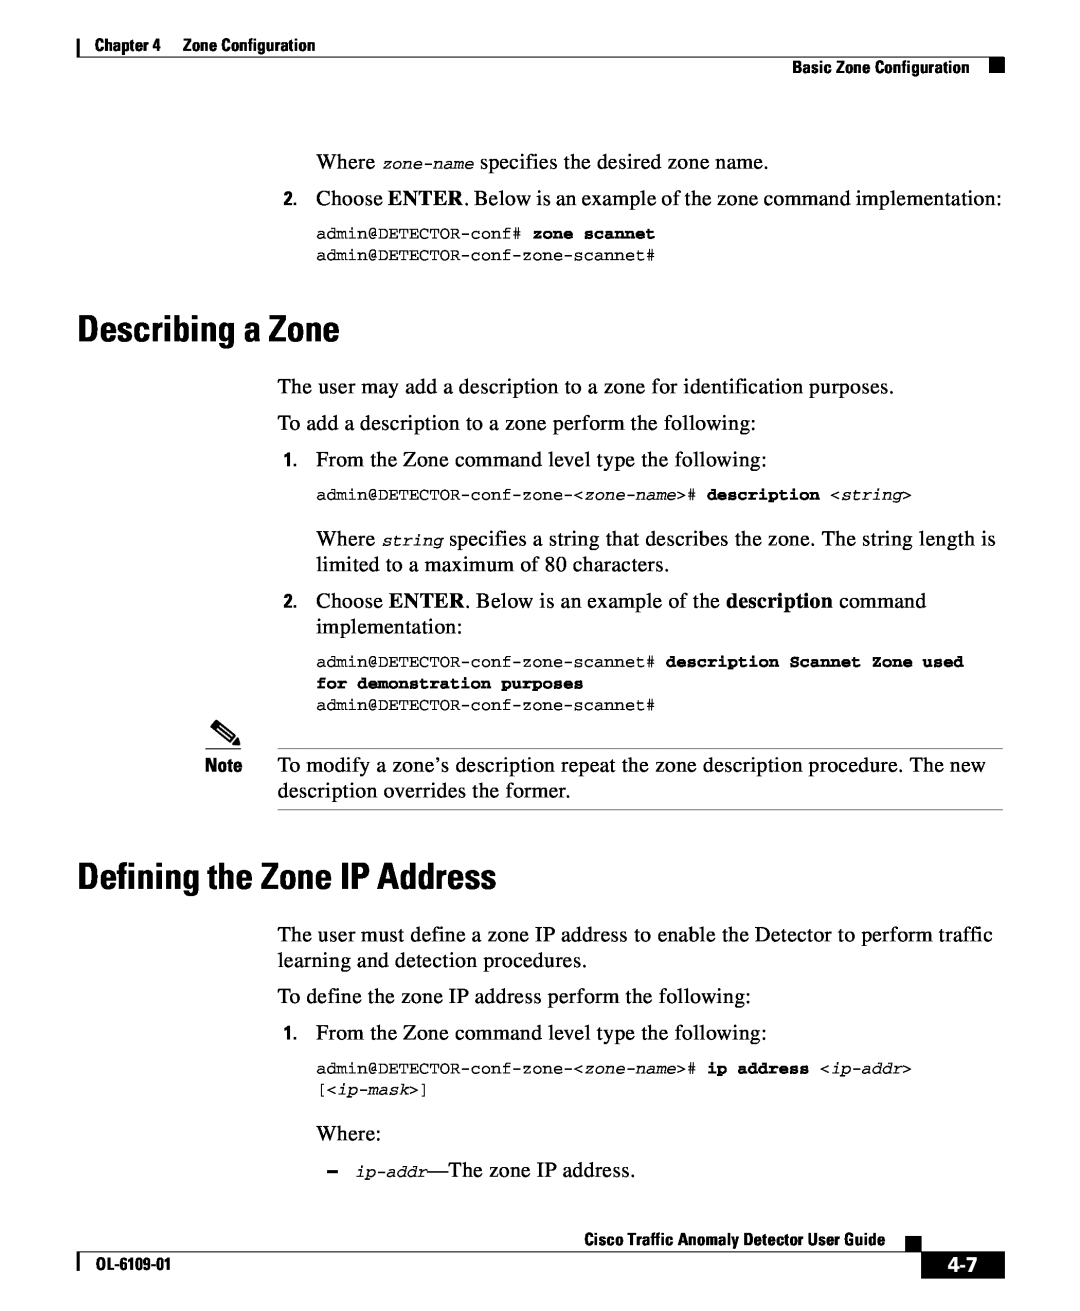 Cisco Systems OL-6109-01 manual Describing a Zone, Defining the Zone IP Address, for demonstration purposes 